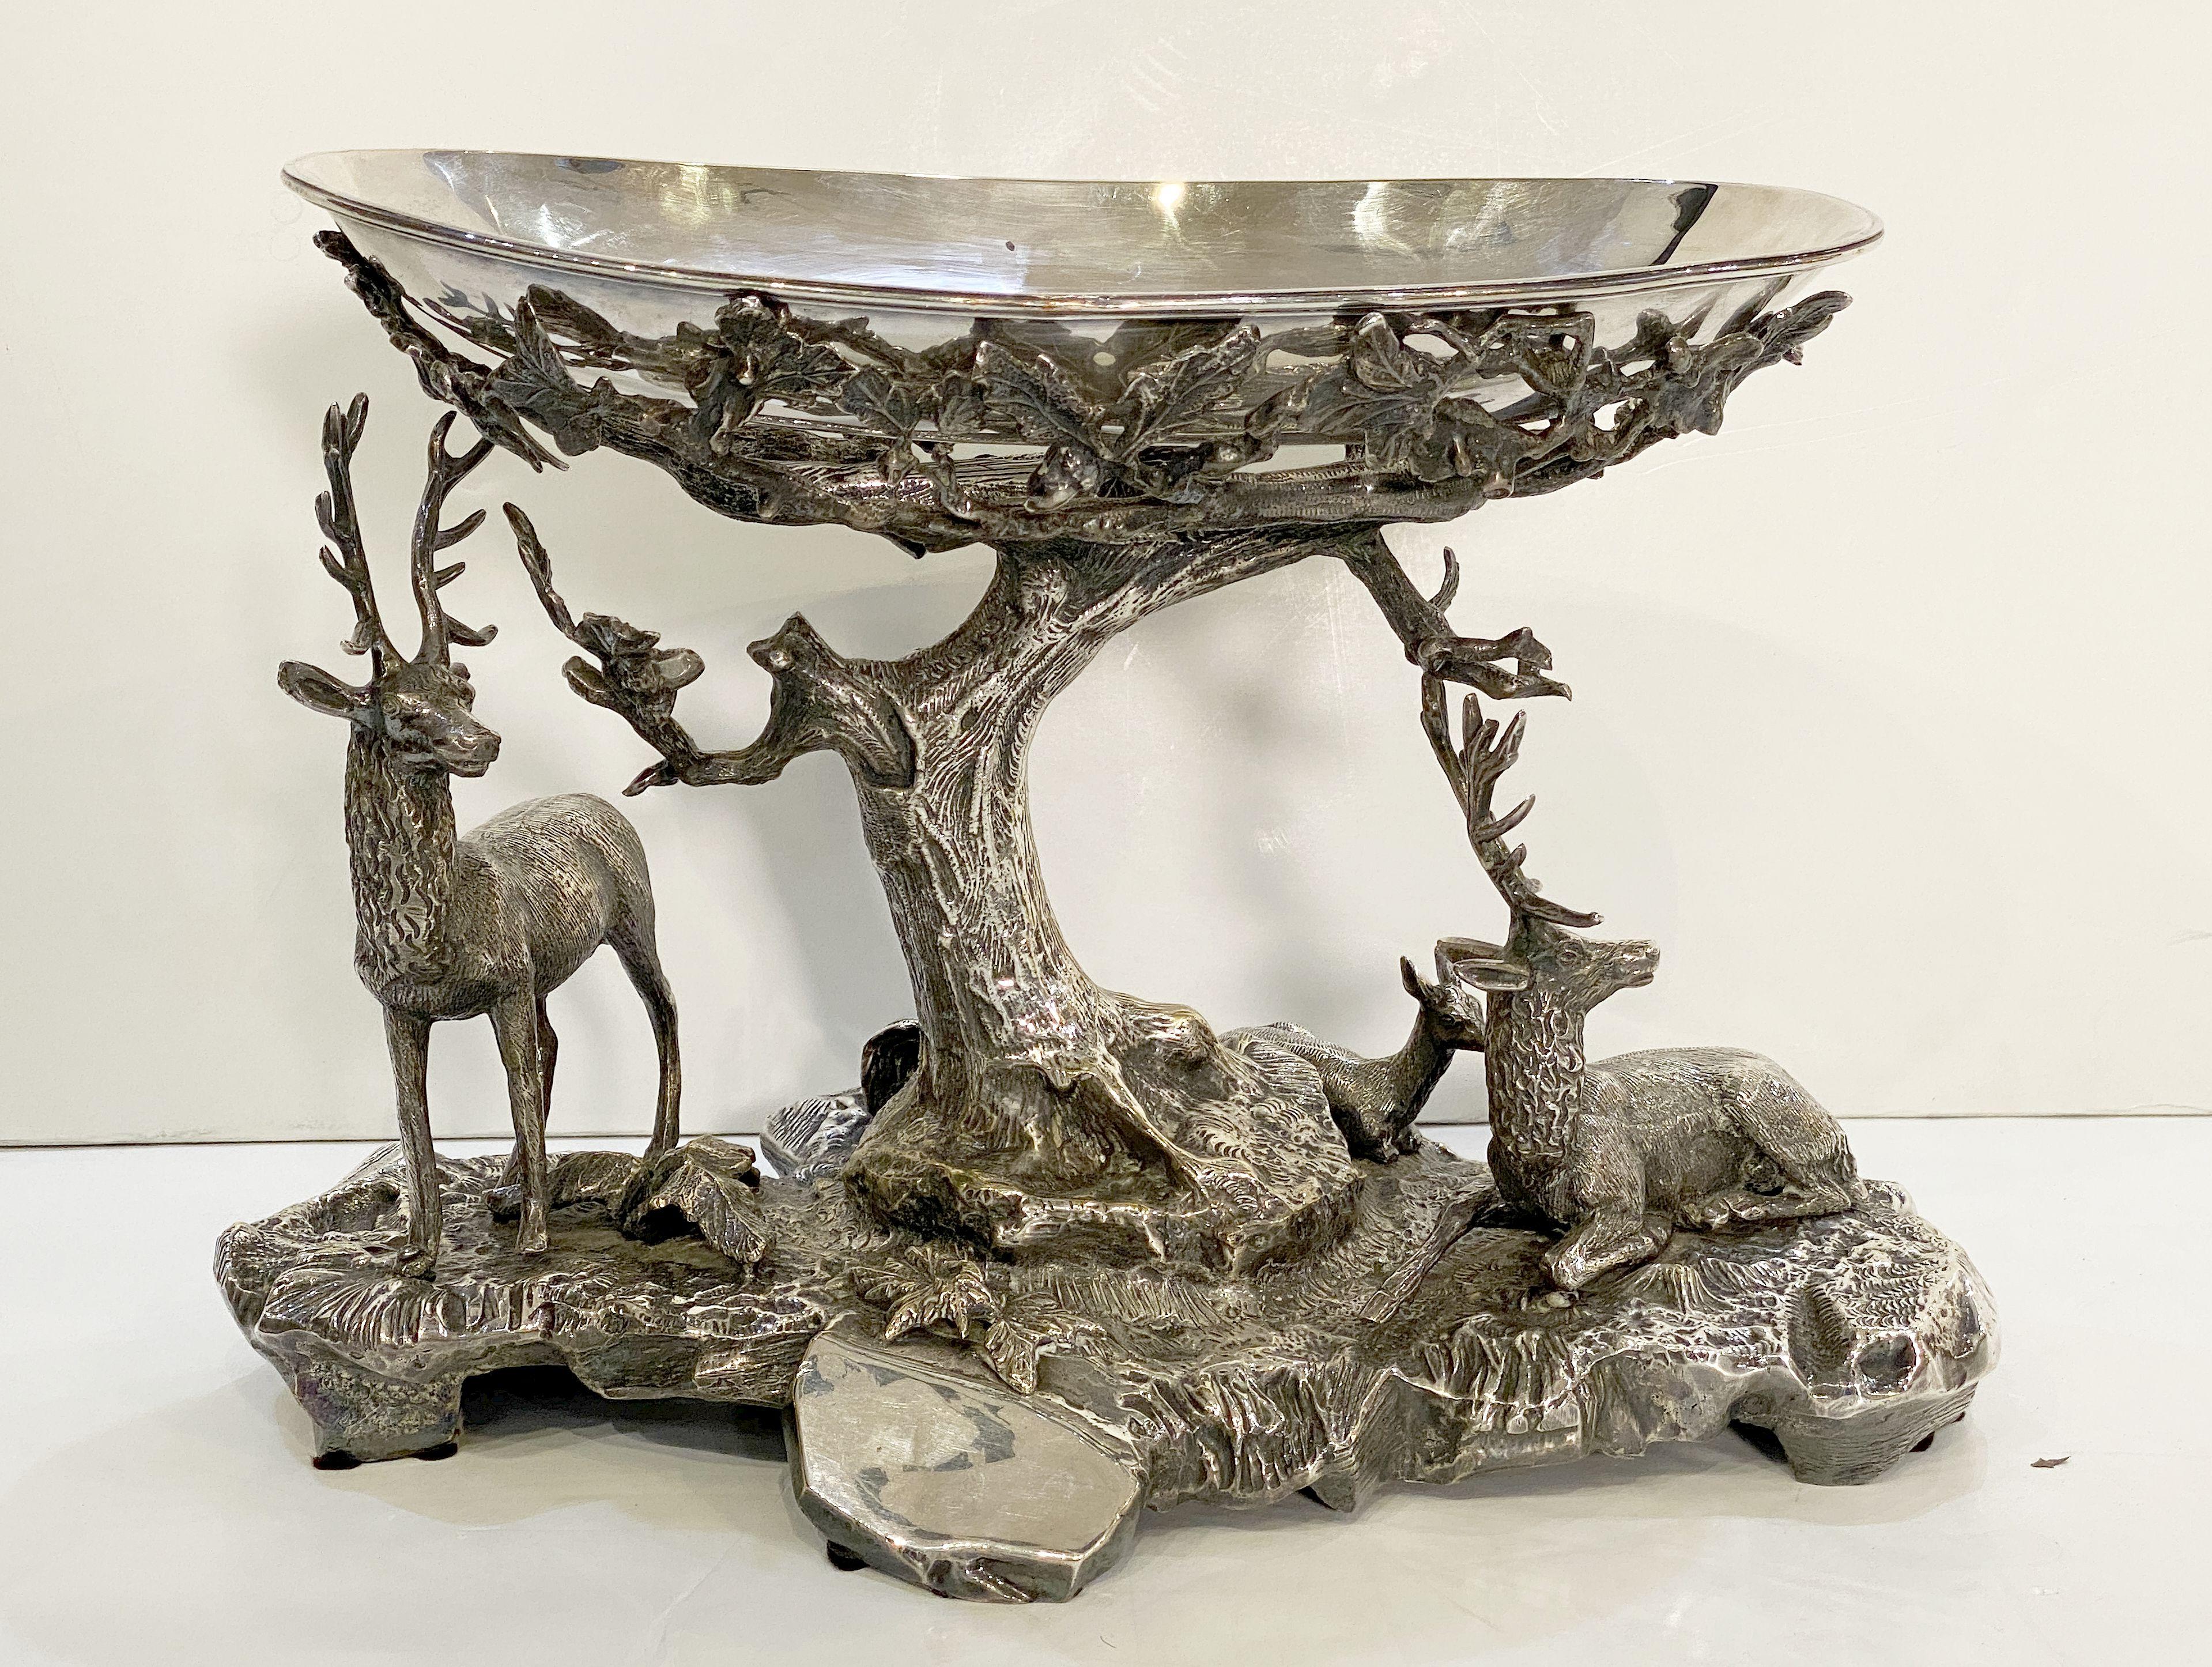 Large Valenti Stag or Deer Sculptural Centerpiece of Silver Plated Bronze  11